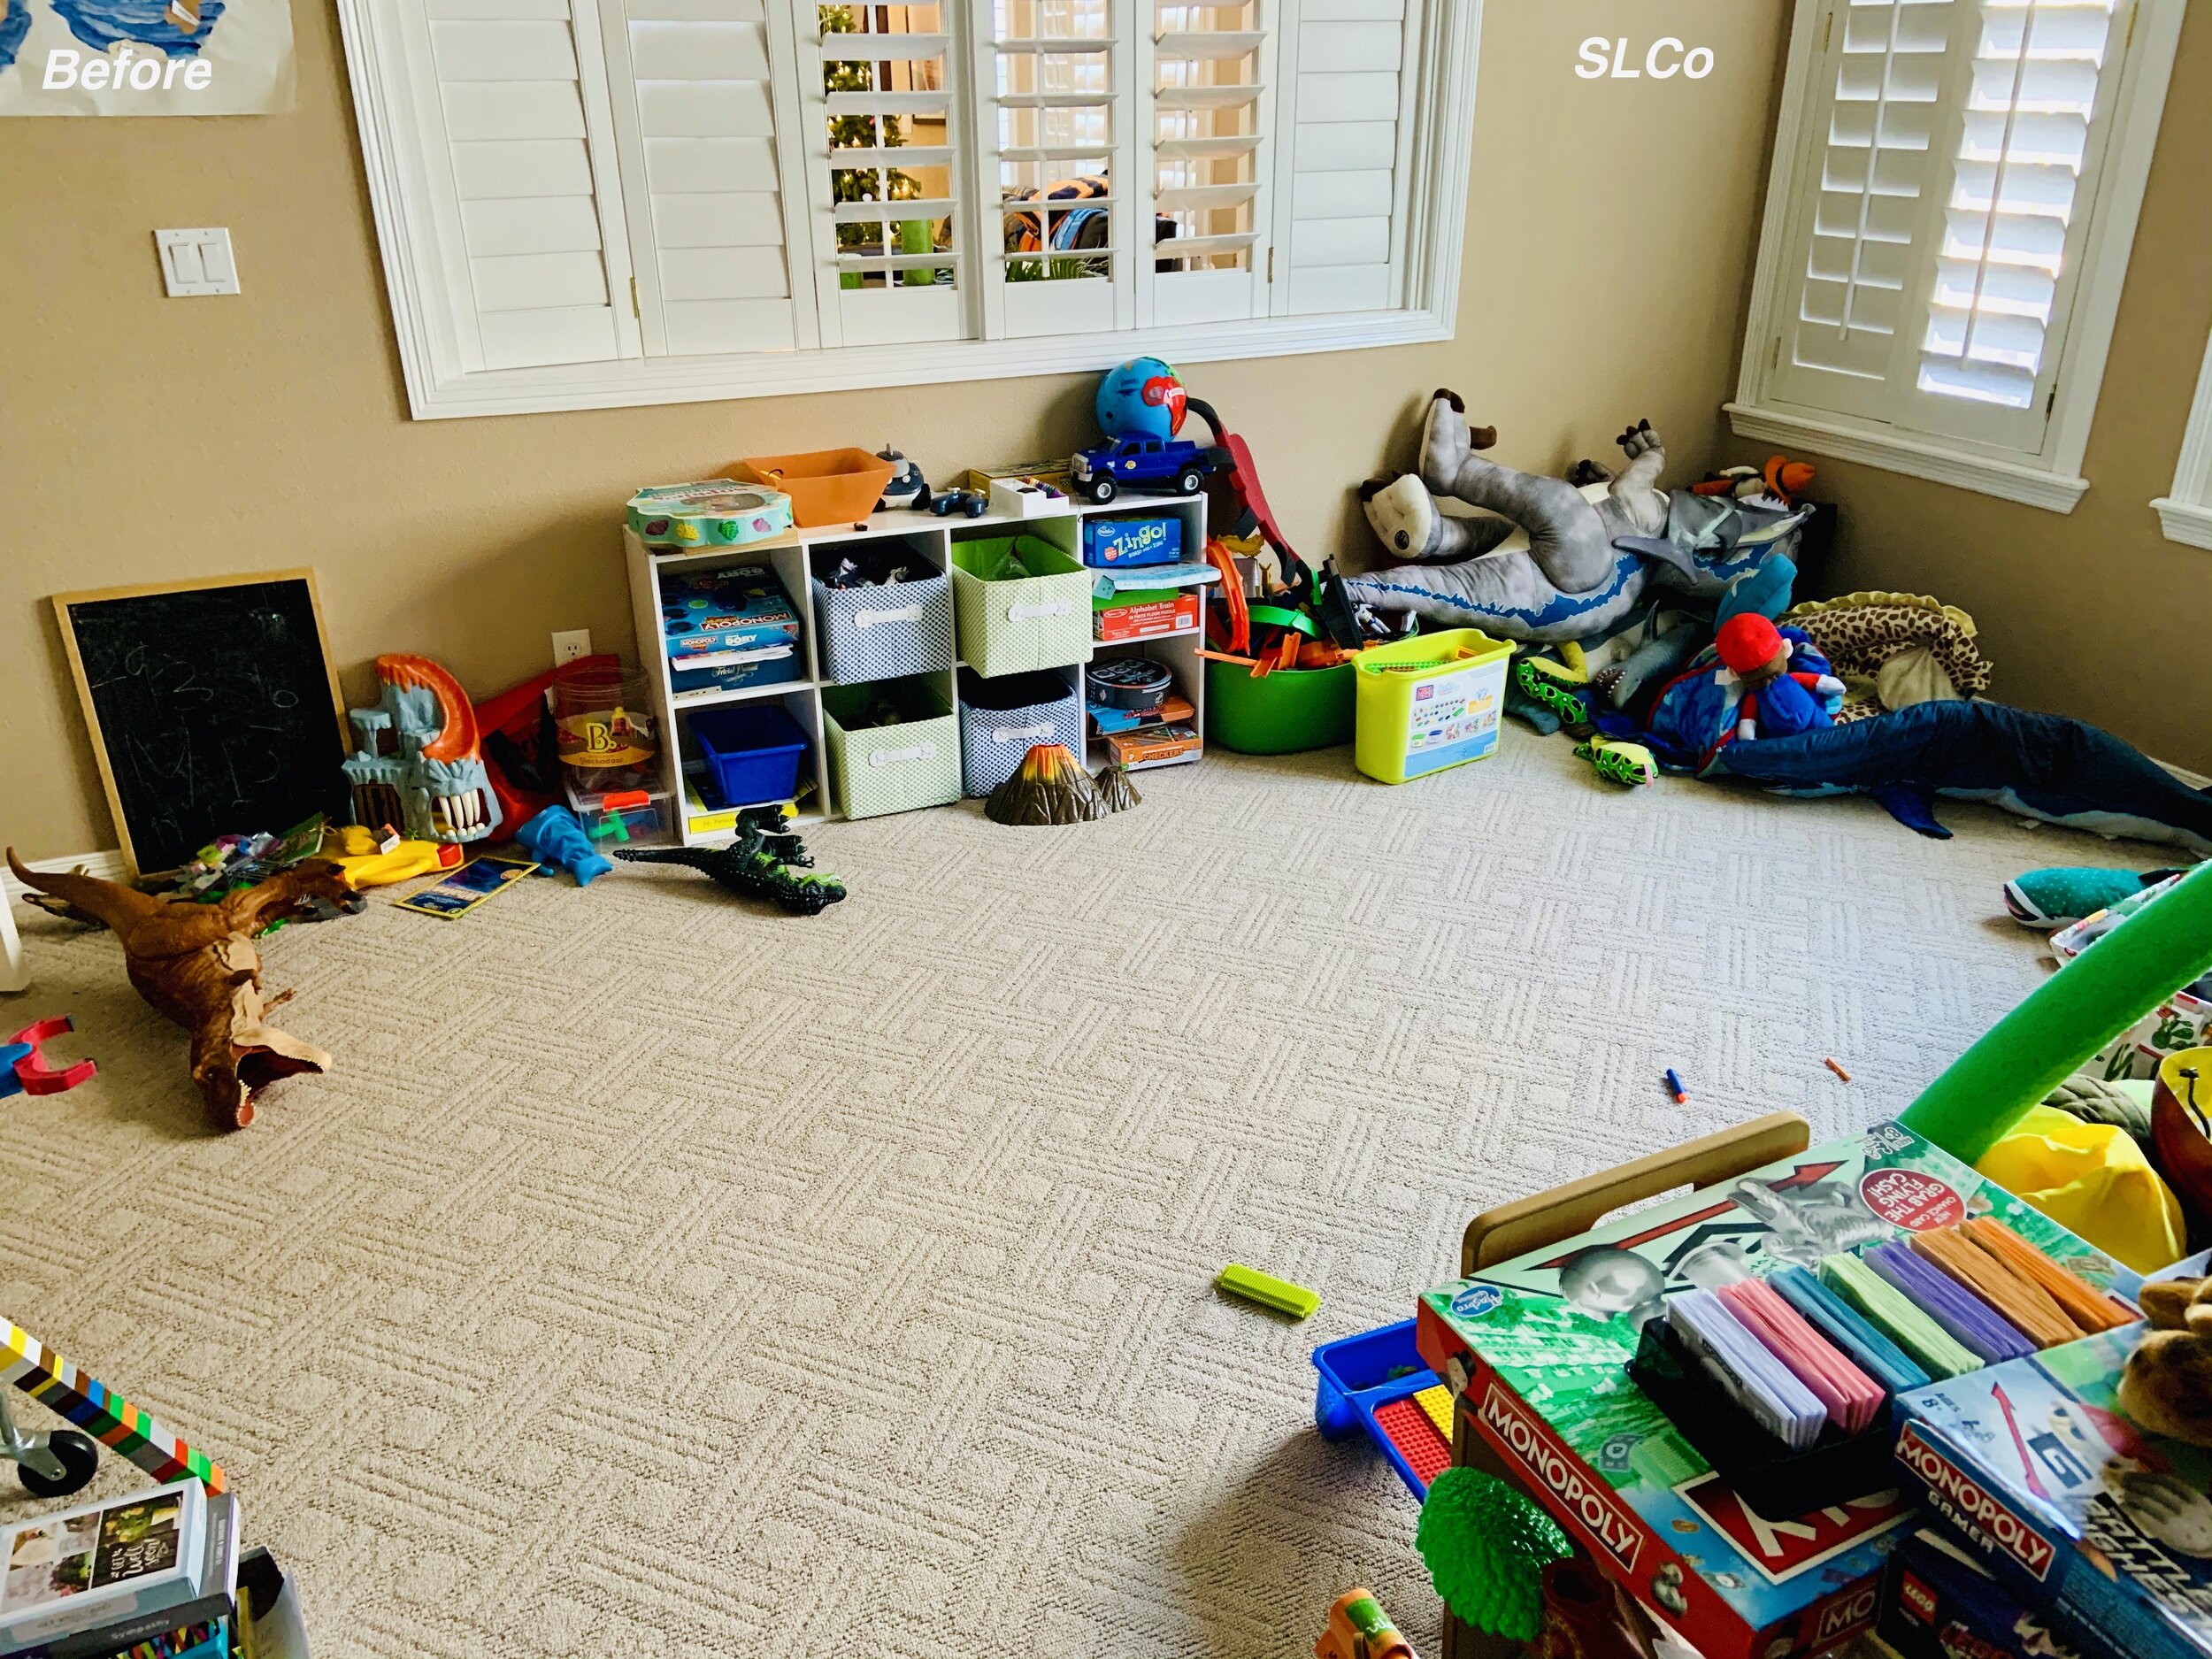 Before photo of a playroom with  cubbies on the wall and items overflowing to the floor.